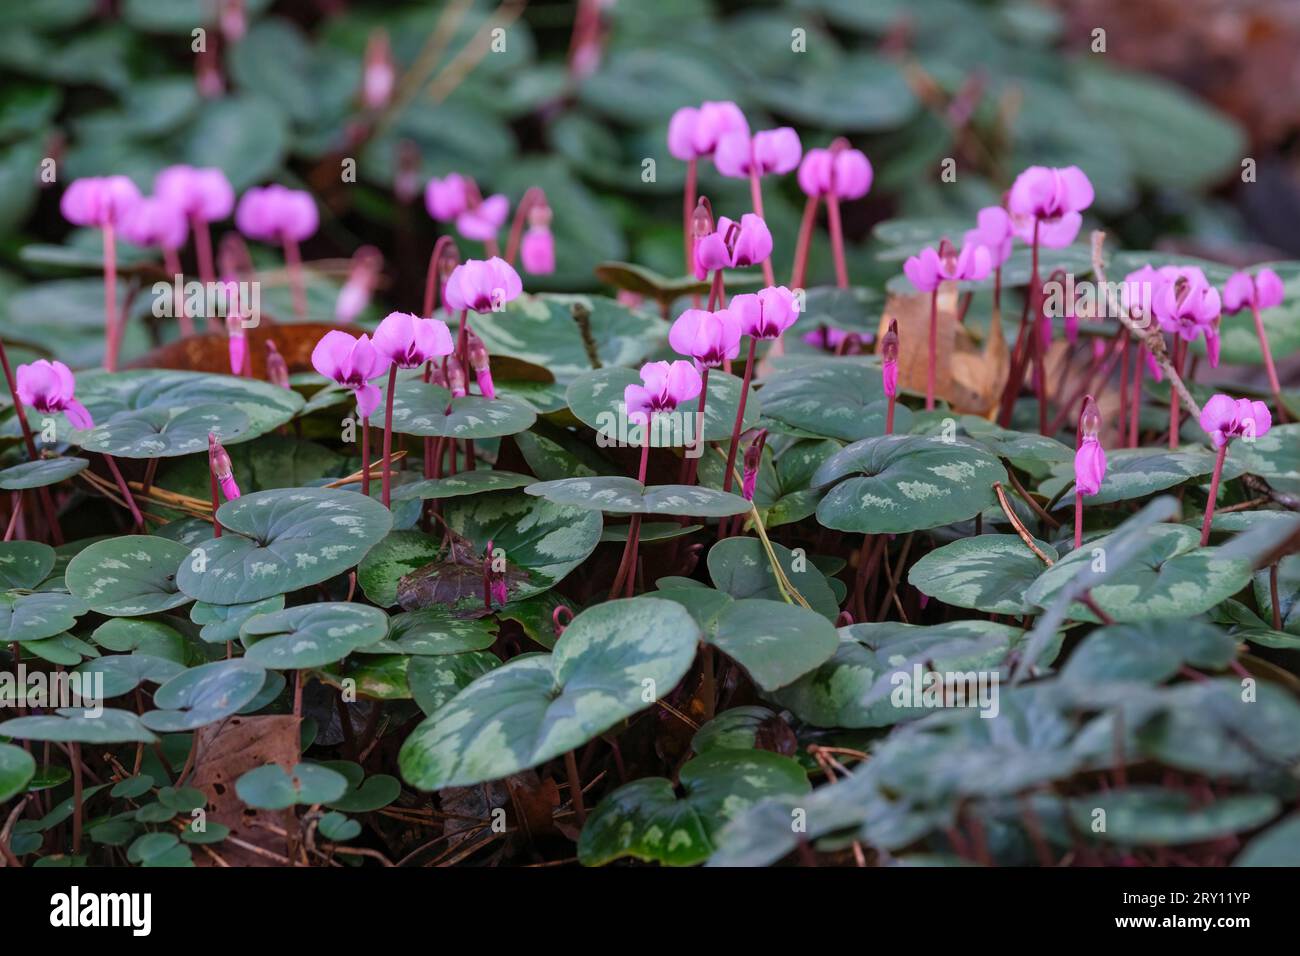 Cyclamen coum, eastern sowbread, tuberous, persian violet, Eastern cyclamen, round-leaved cyclamen, heart-shaped leaves, pink shell-shaped flowers Stock Photo